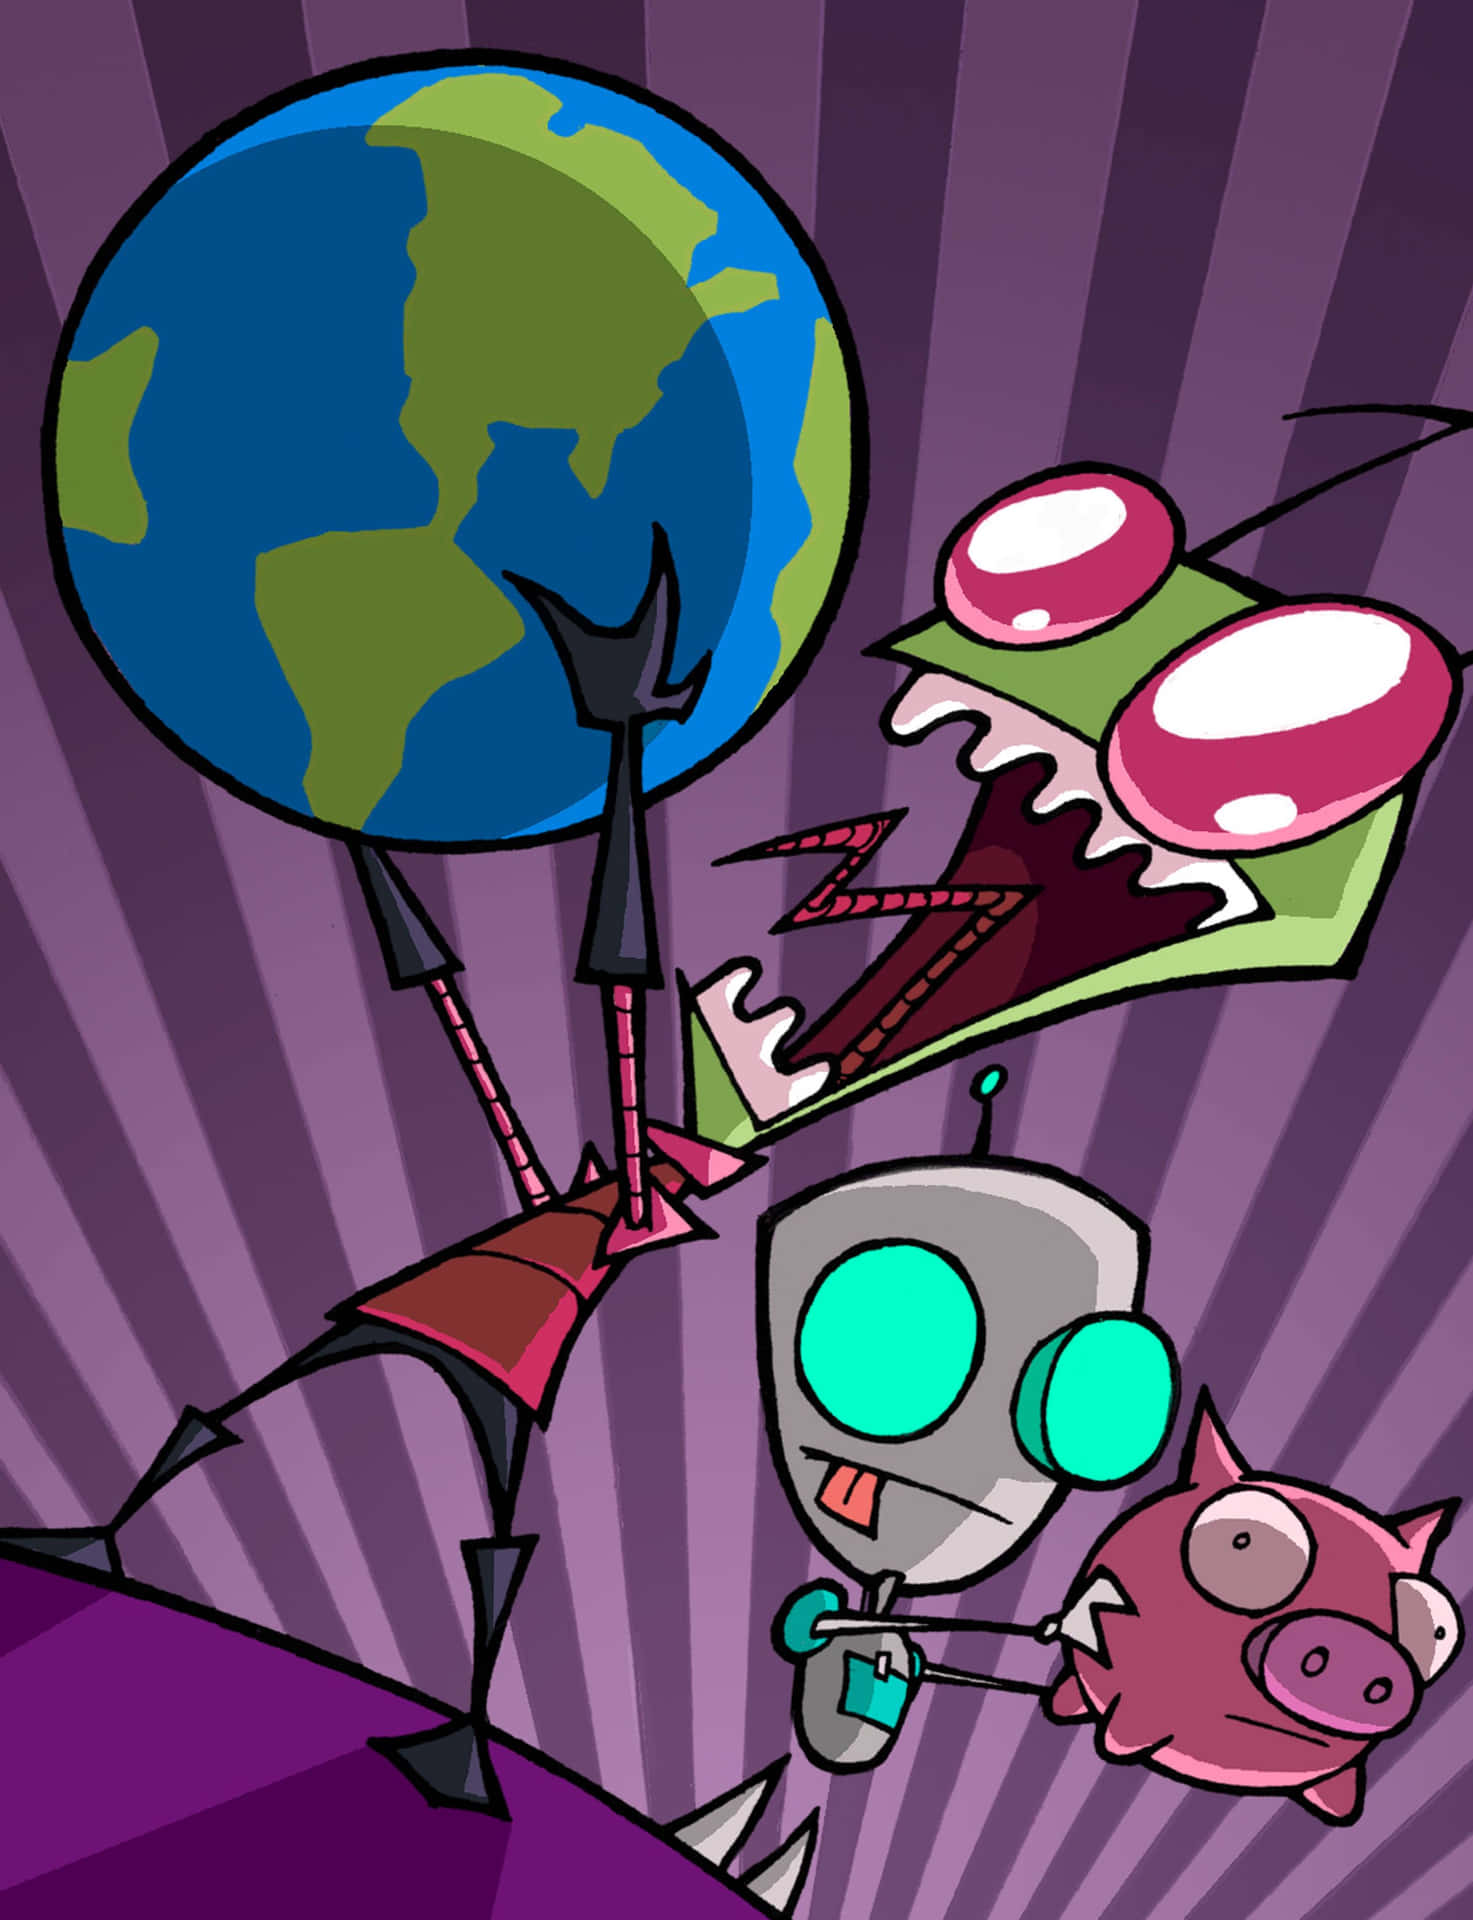 Invader Zim and GIR in action